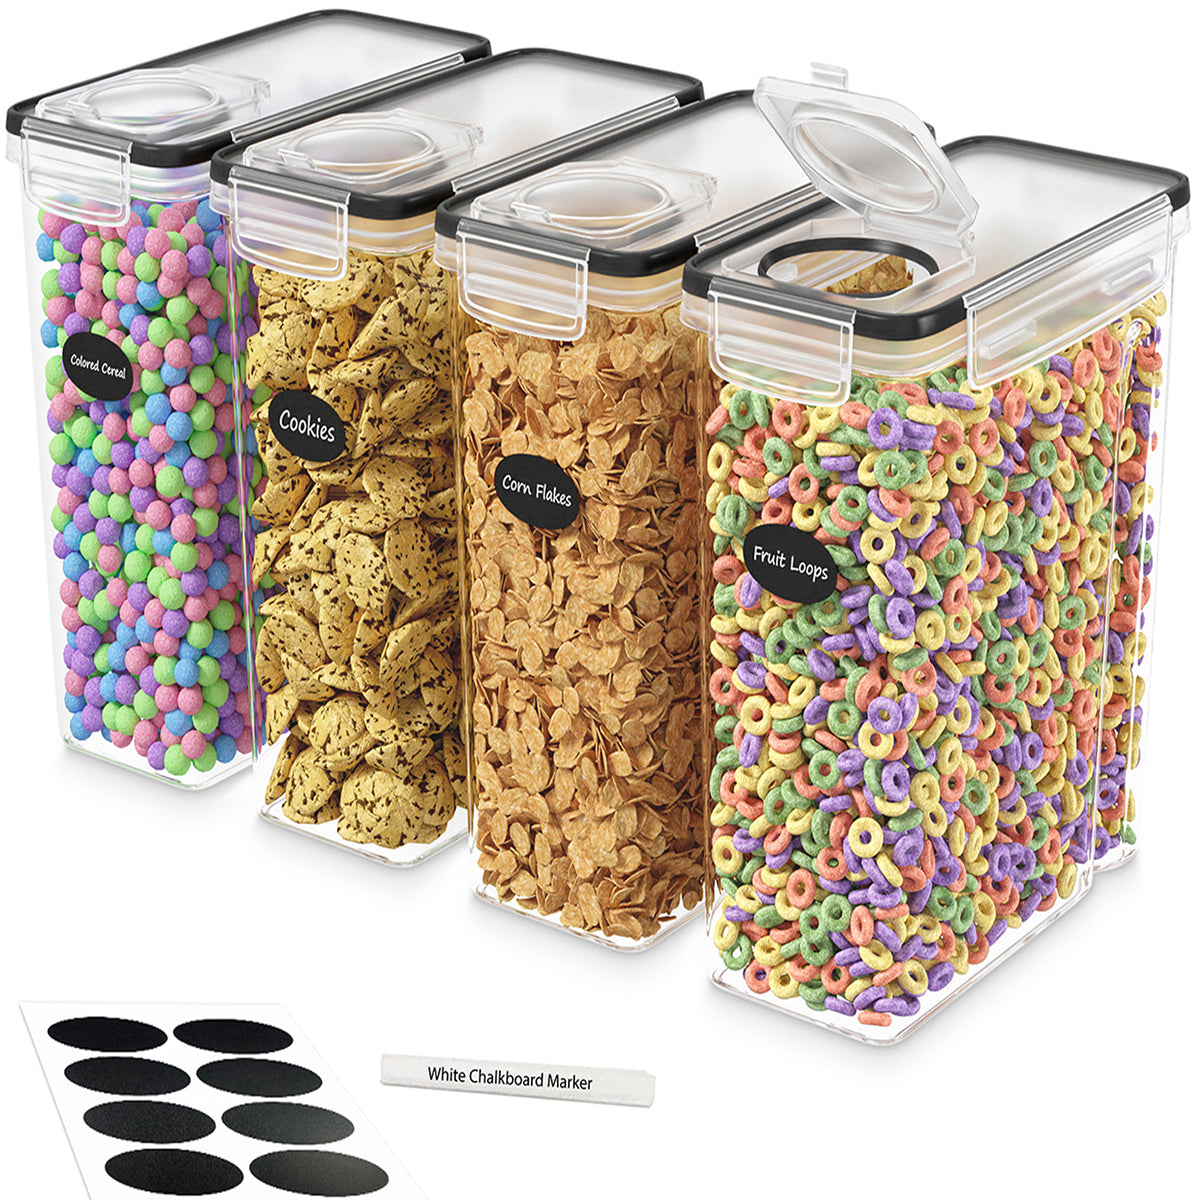 Cereal Containers Storage Set - 4 Piece Airtight Food Storage